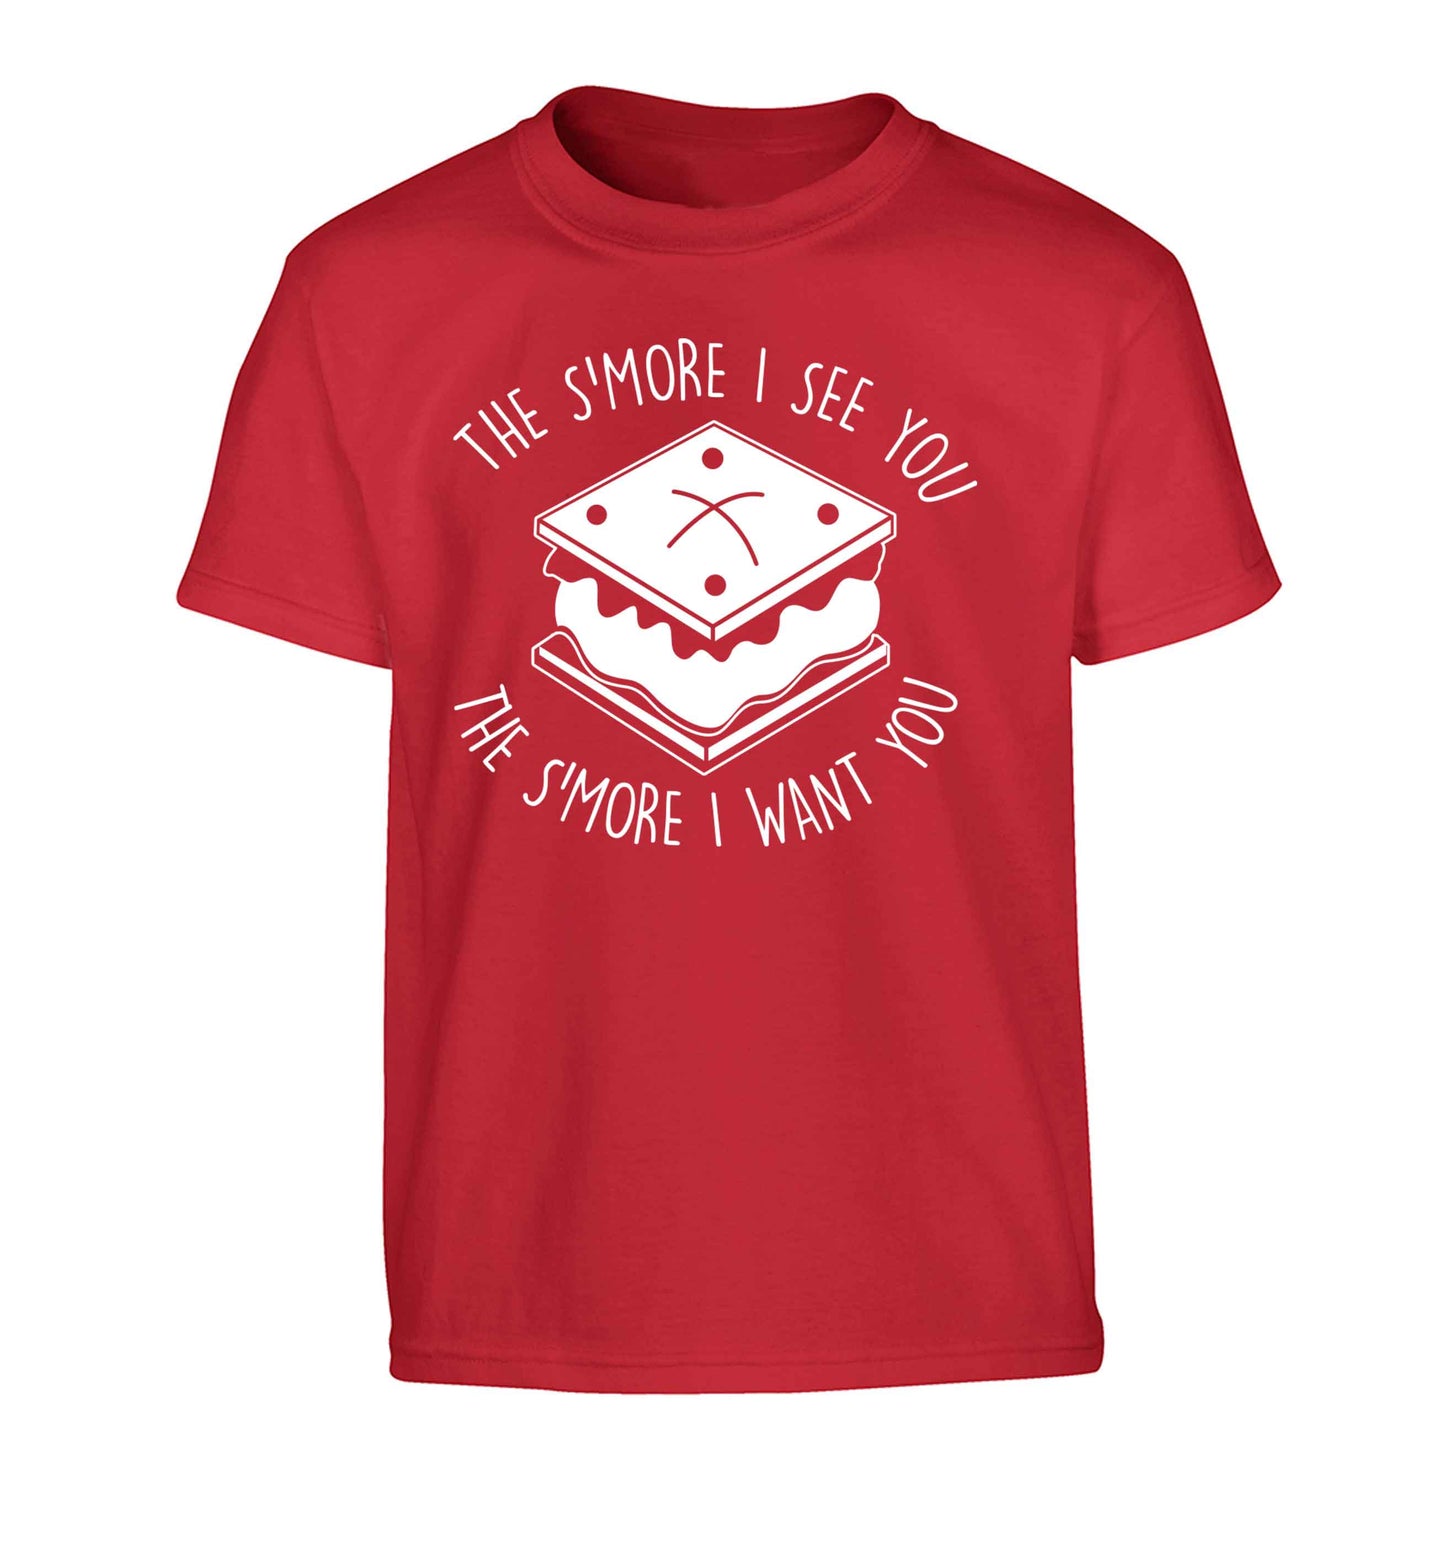 The s'more I see you the s'more I want you Children's red Tshirt 12-13 Years